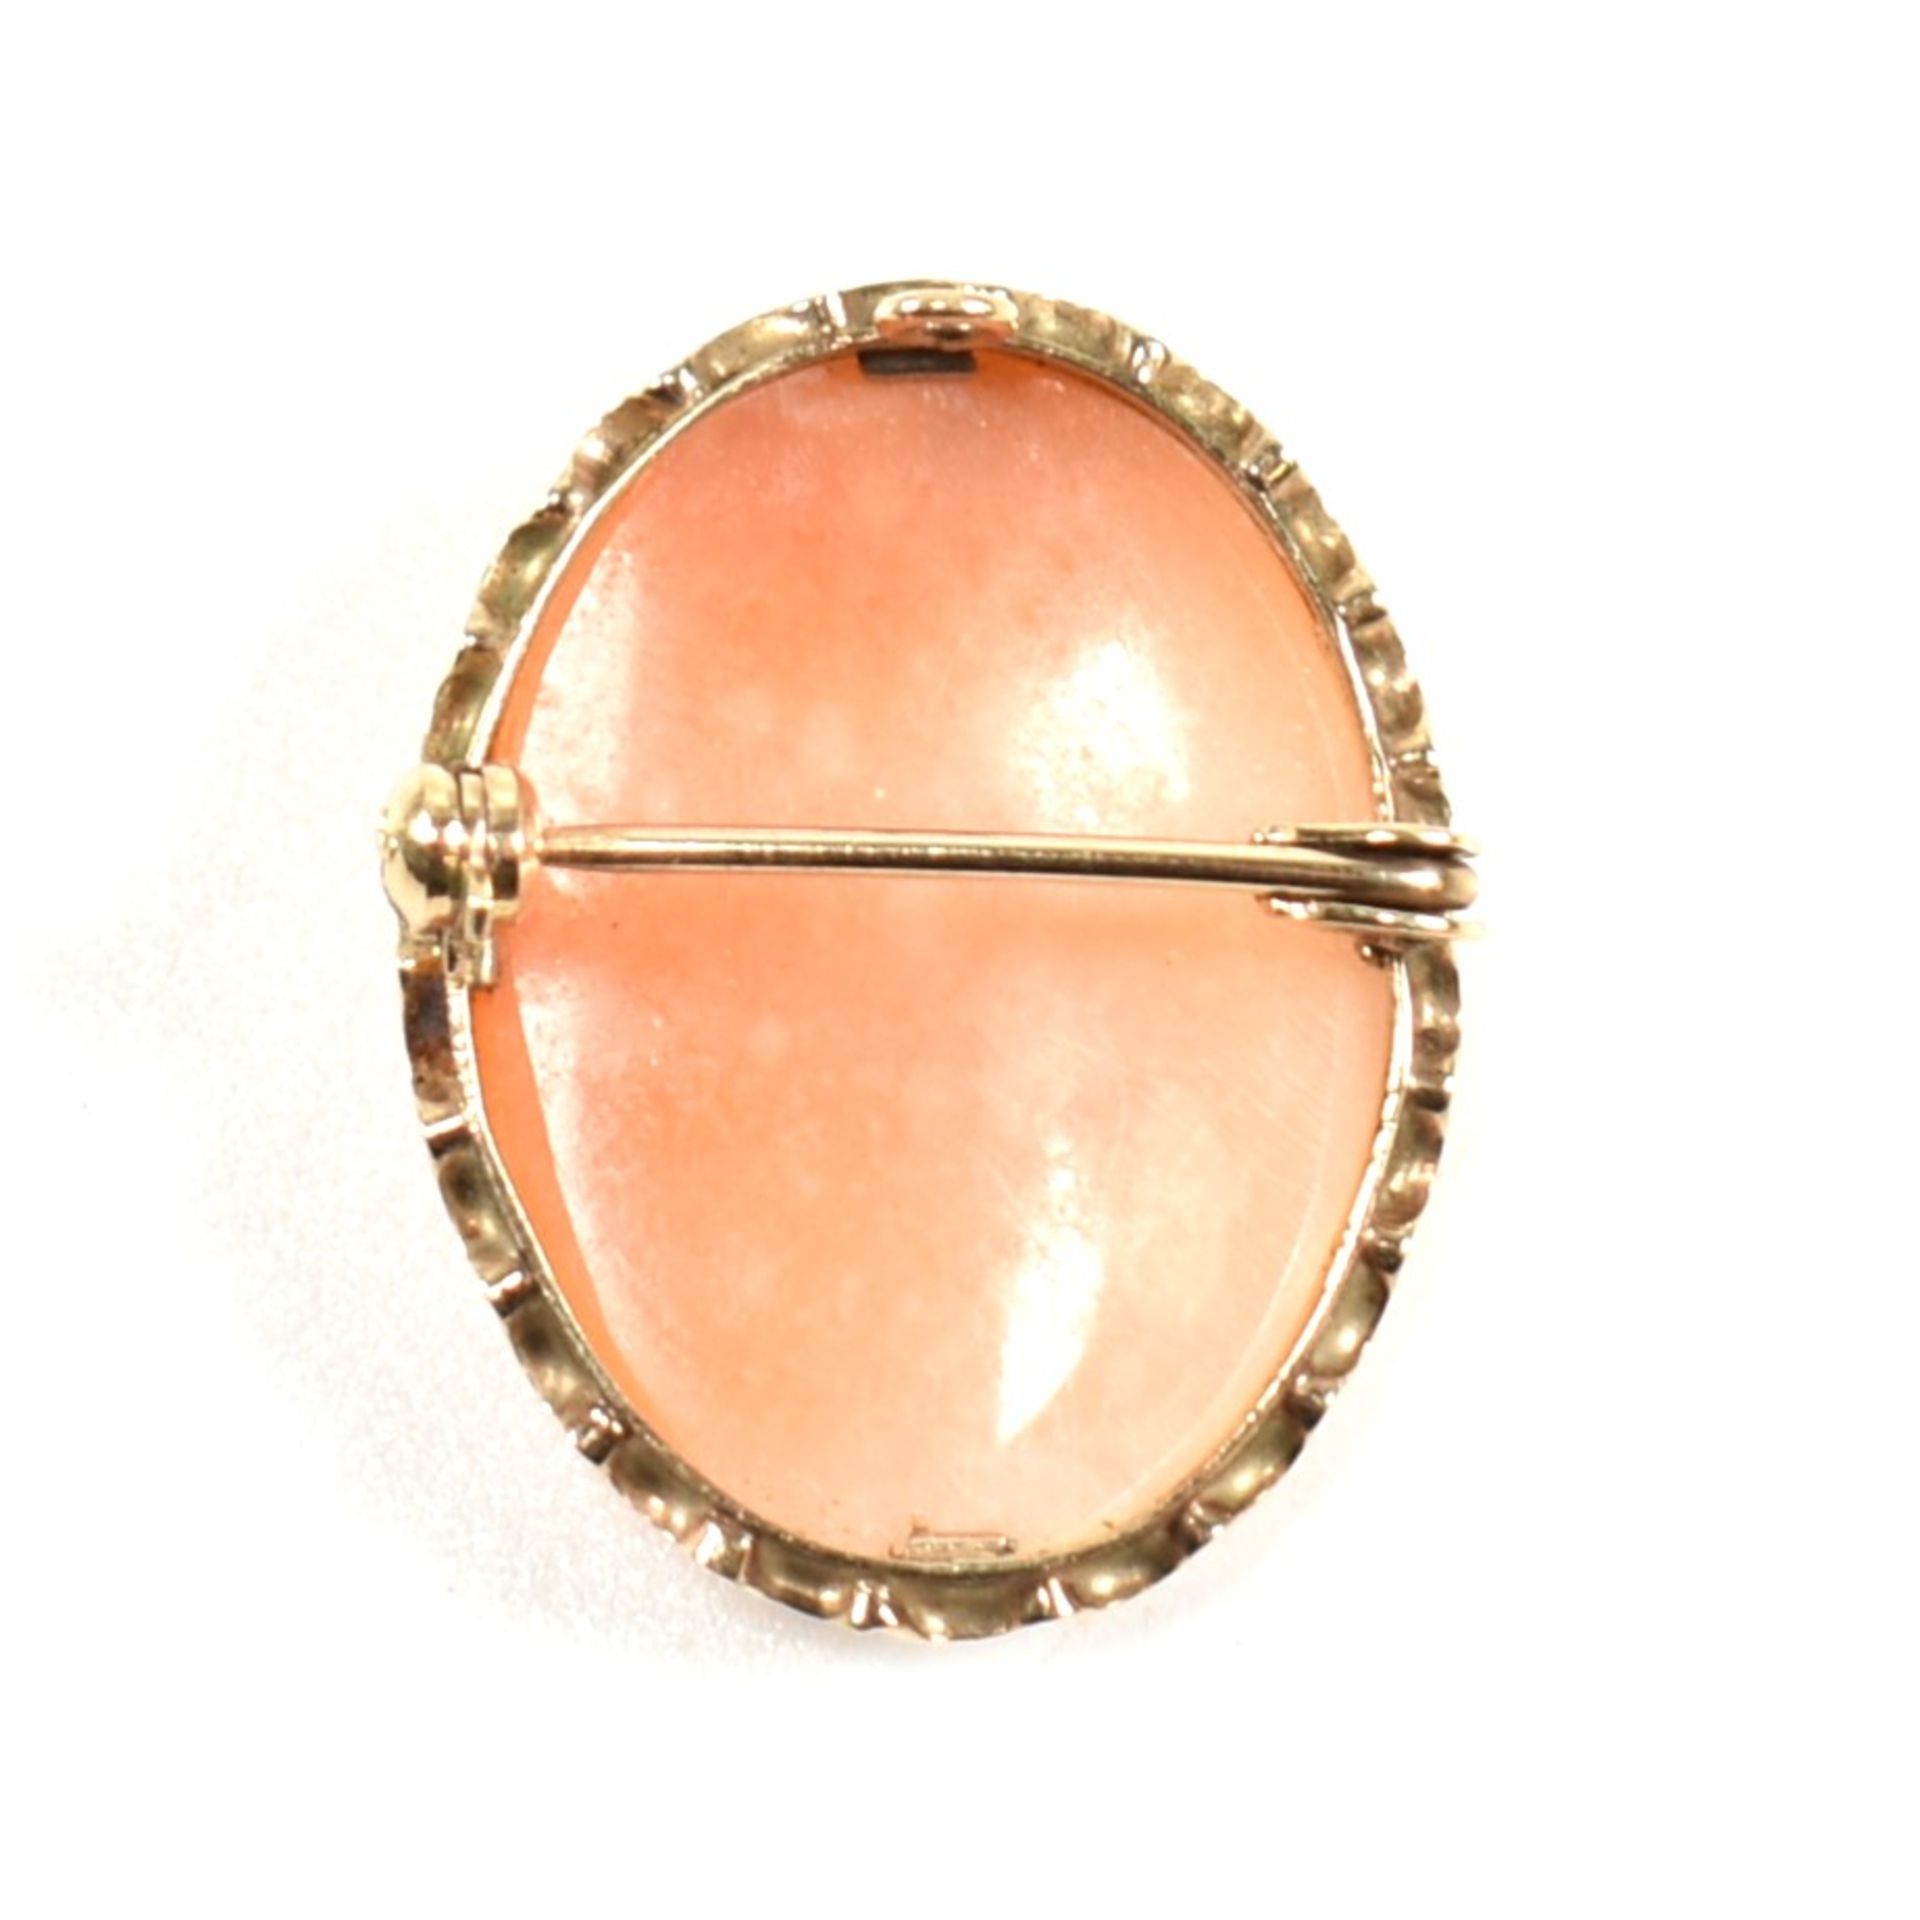 HALLMARKED 9CT GOLD CAMEO BROOCH PIN - Image 2 of 4